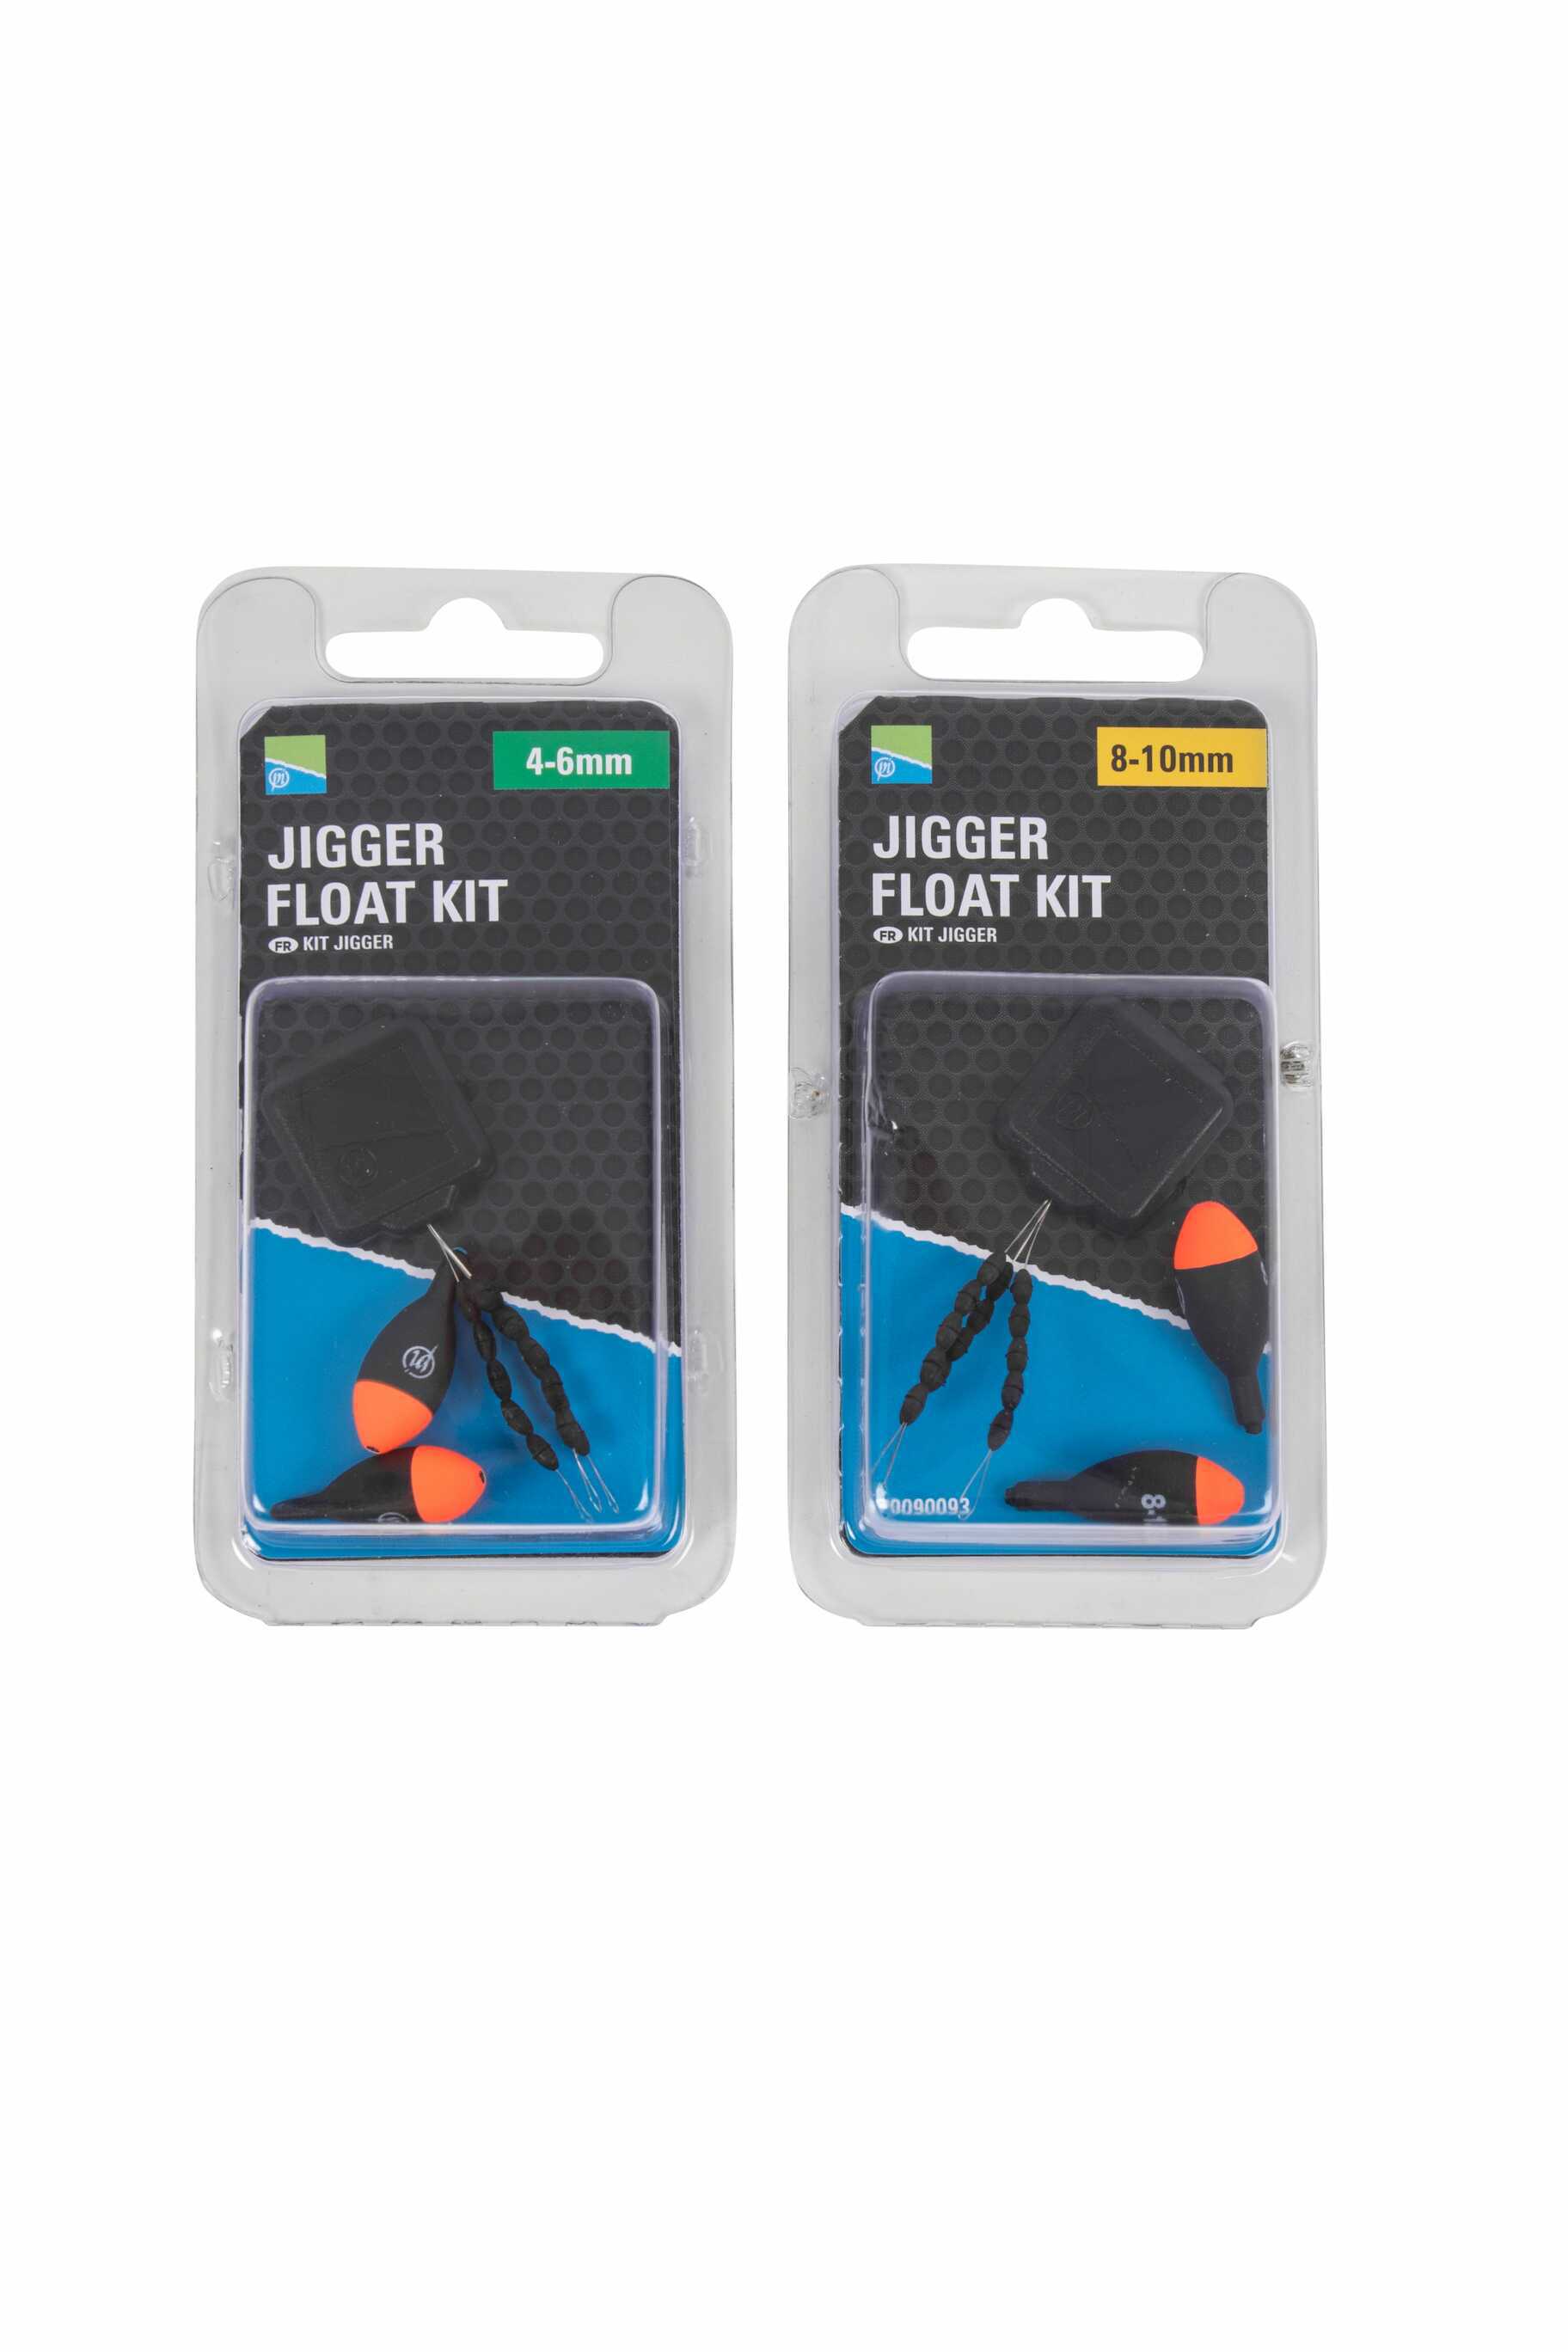 Jigger Float Kit, UK Match Fishing Tackle For True Anglers